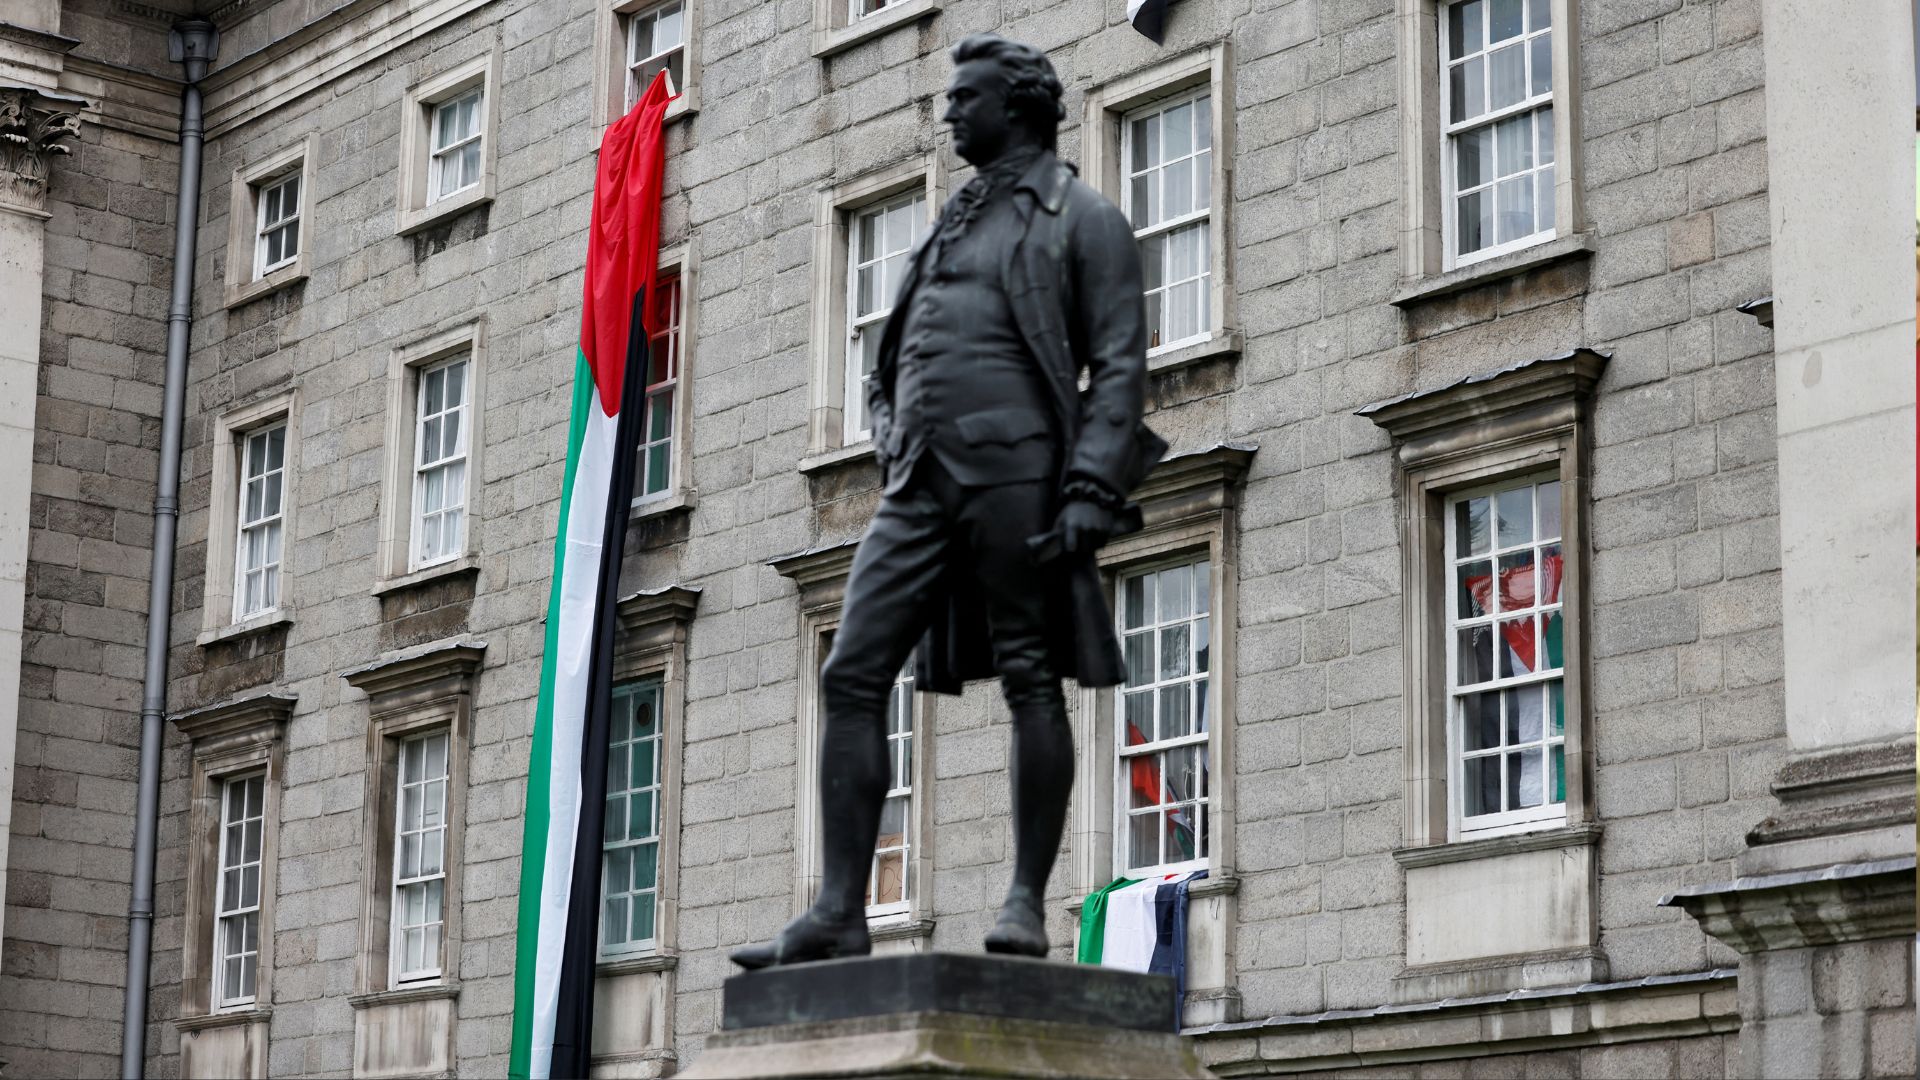 Palestinian flags hang on the front of the Trinity College in Dublin, Ireland. /Damien Eagers/Reuters